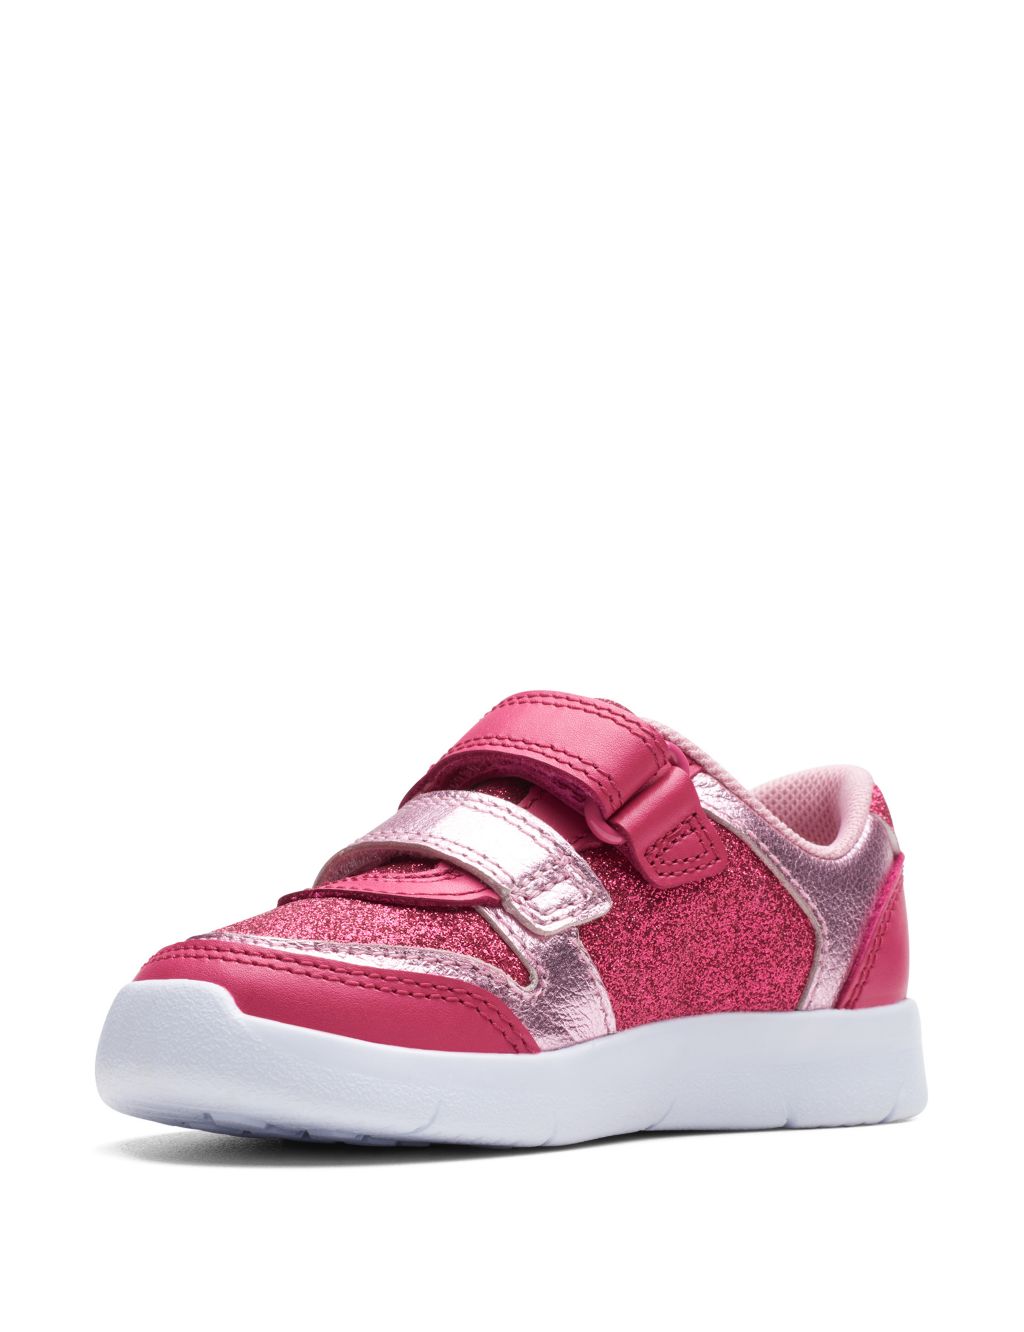 Kids' Leather Glitter Riptape Trainers (3 Small - 6½ Small) image 3